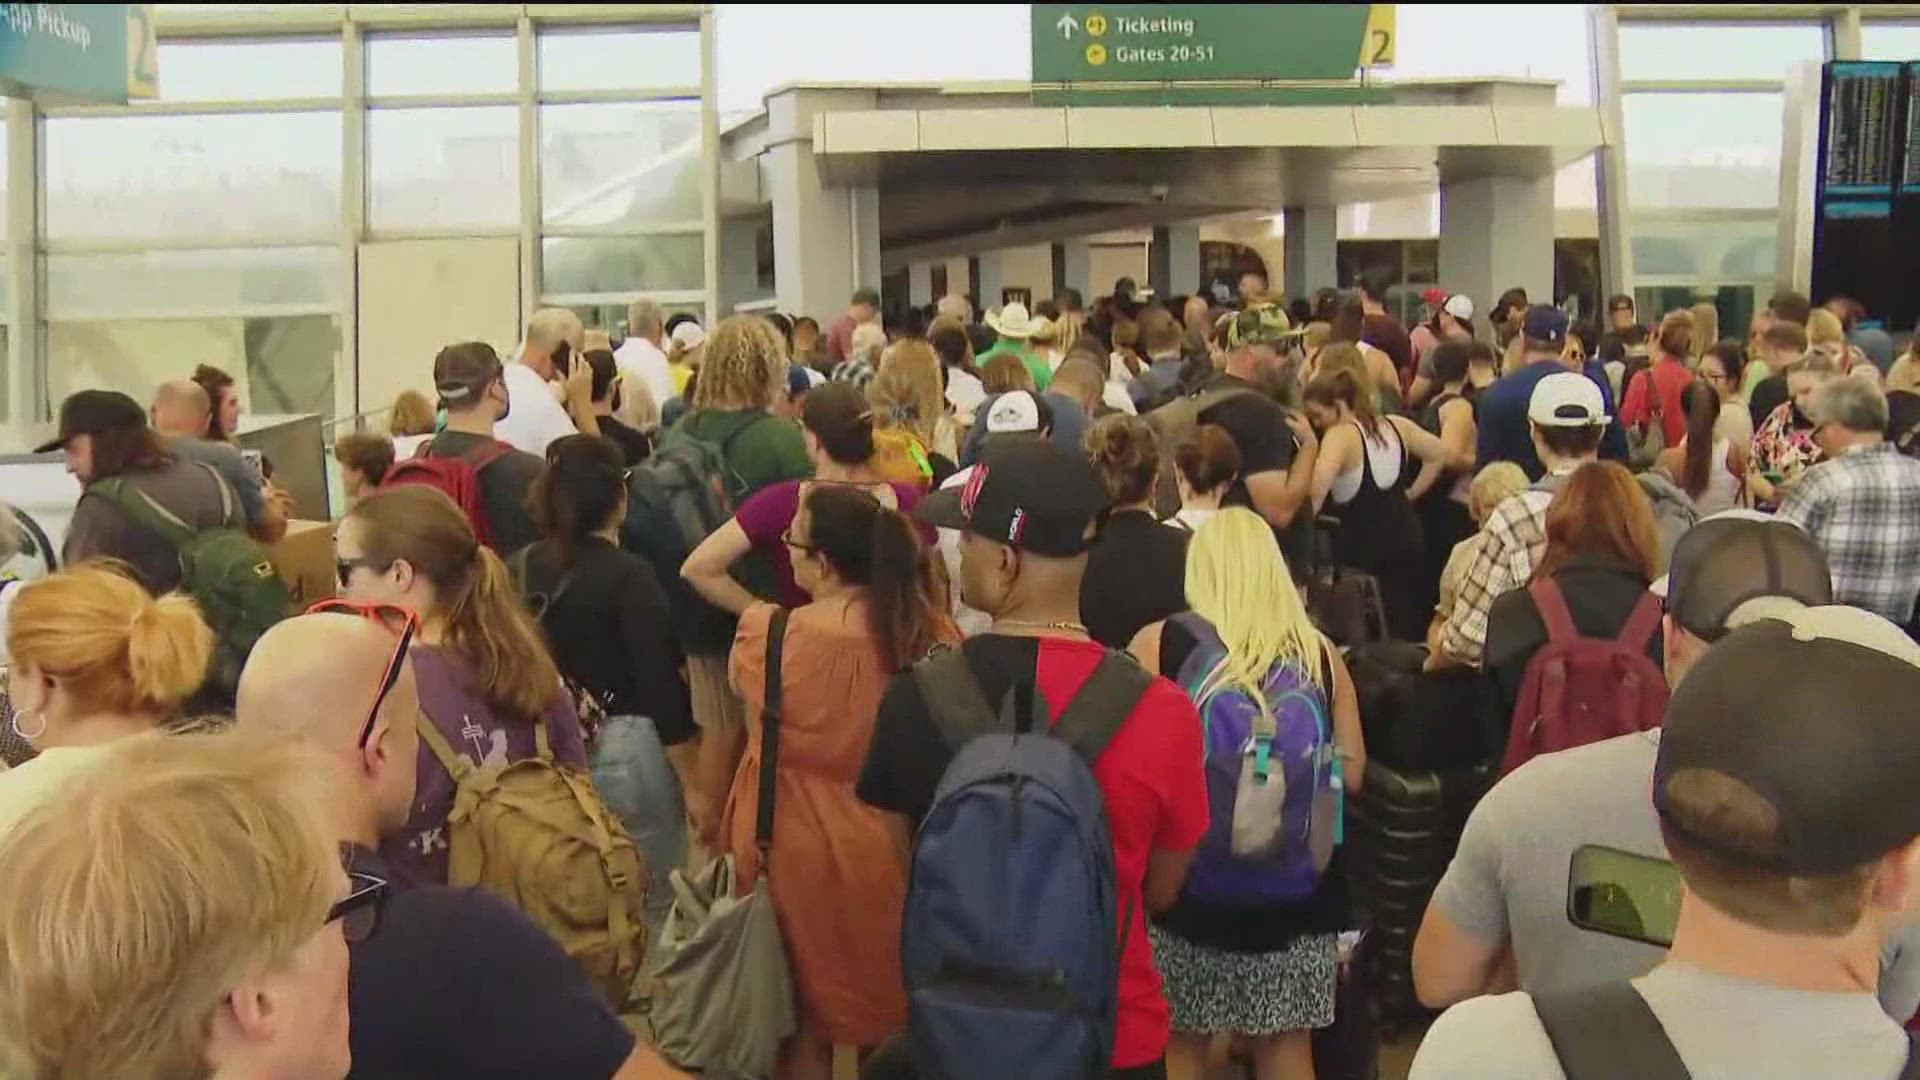 An estimated 5,000 to 7,000 passengers were rescreened after a security breach involving an unscreened piece of luggage prompted evacuations on Thursday.